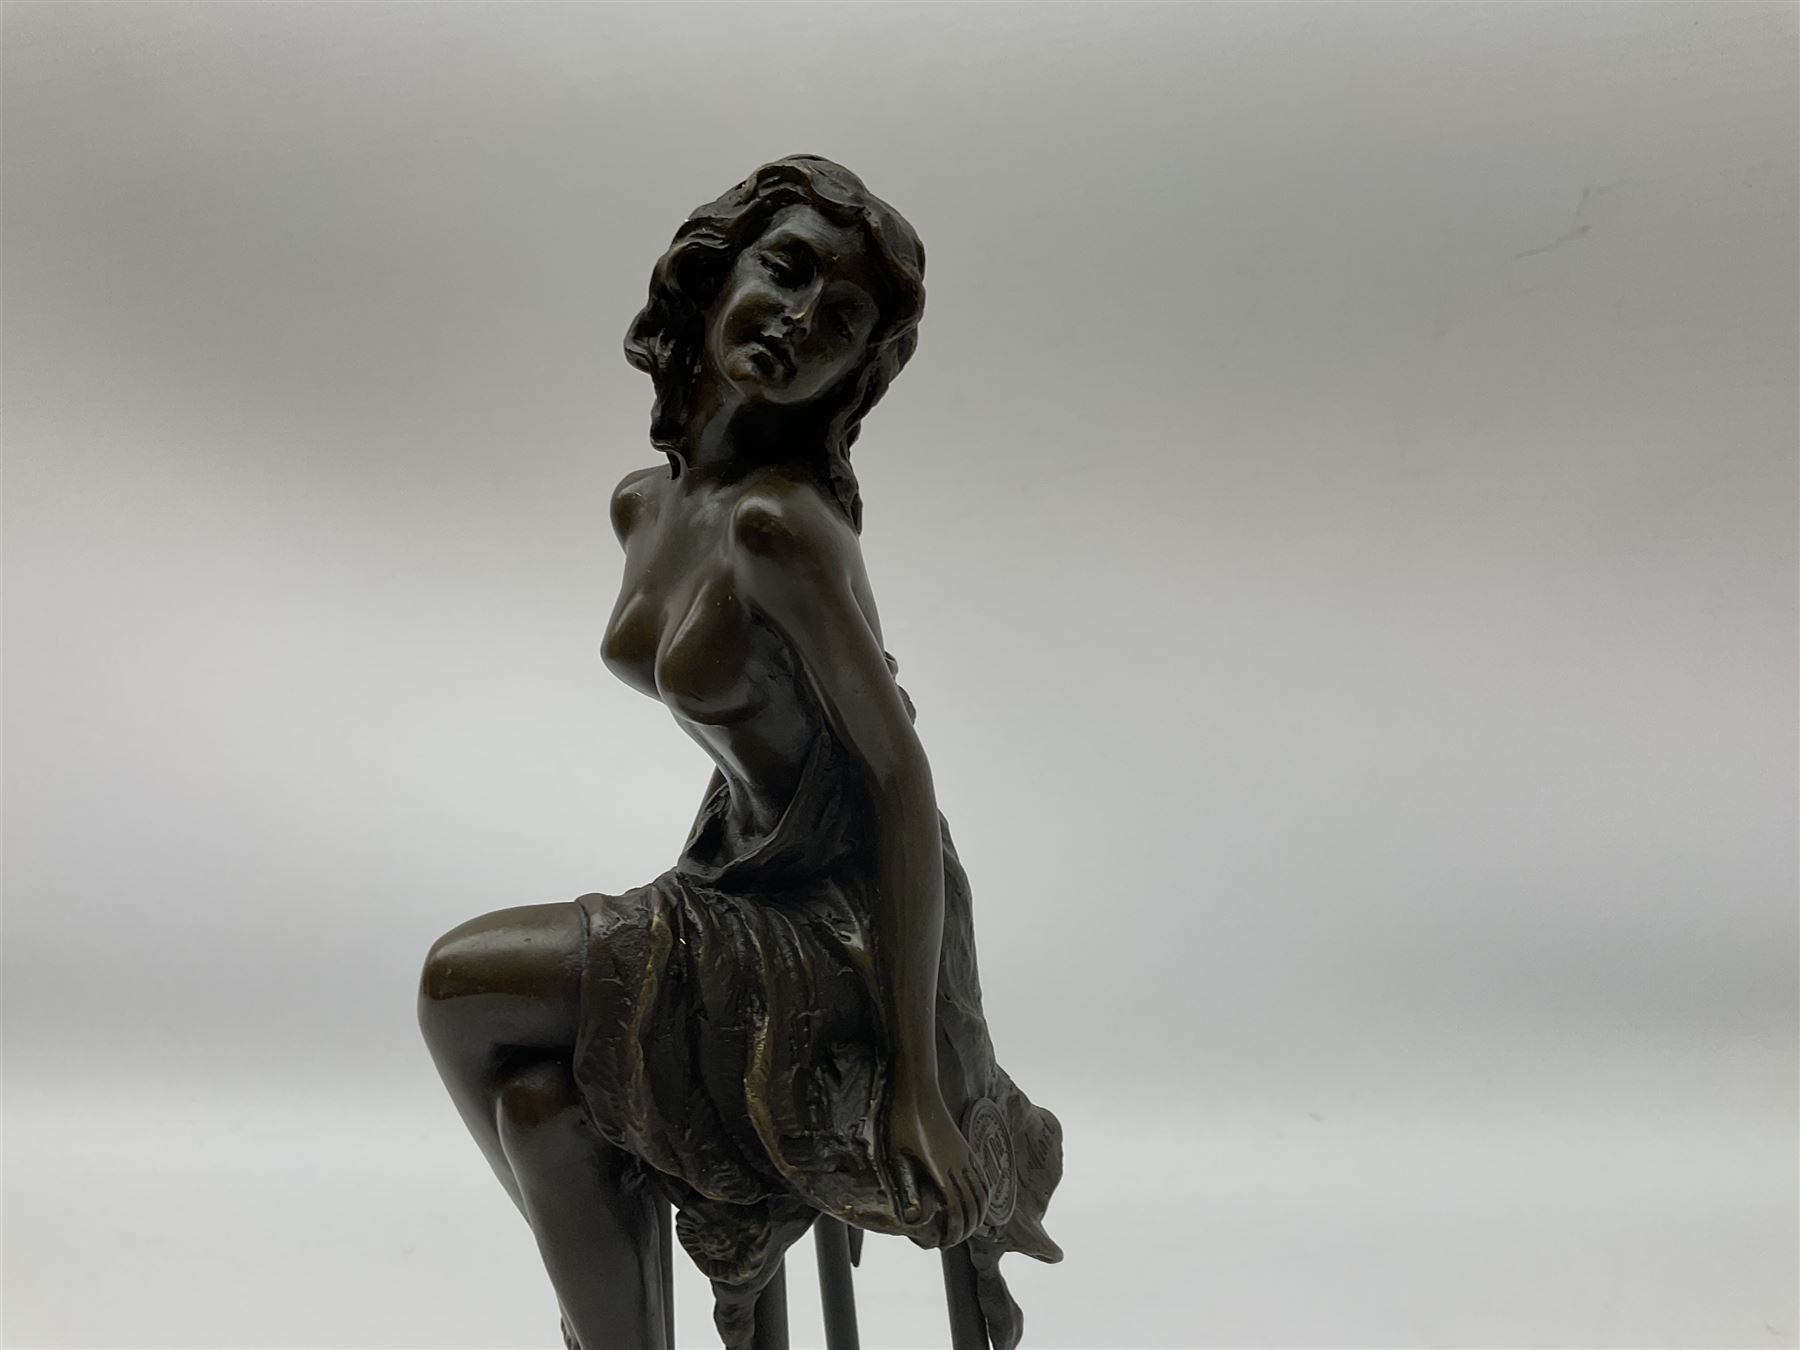 Art Deco style bronze modelled as a bare chested female figure seated upon a chair - Image 2 of 8